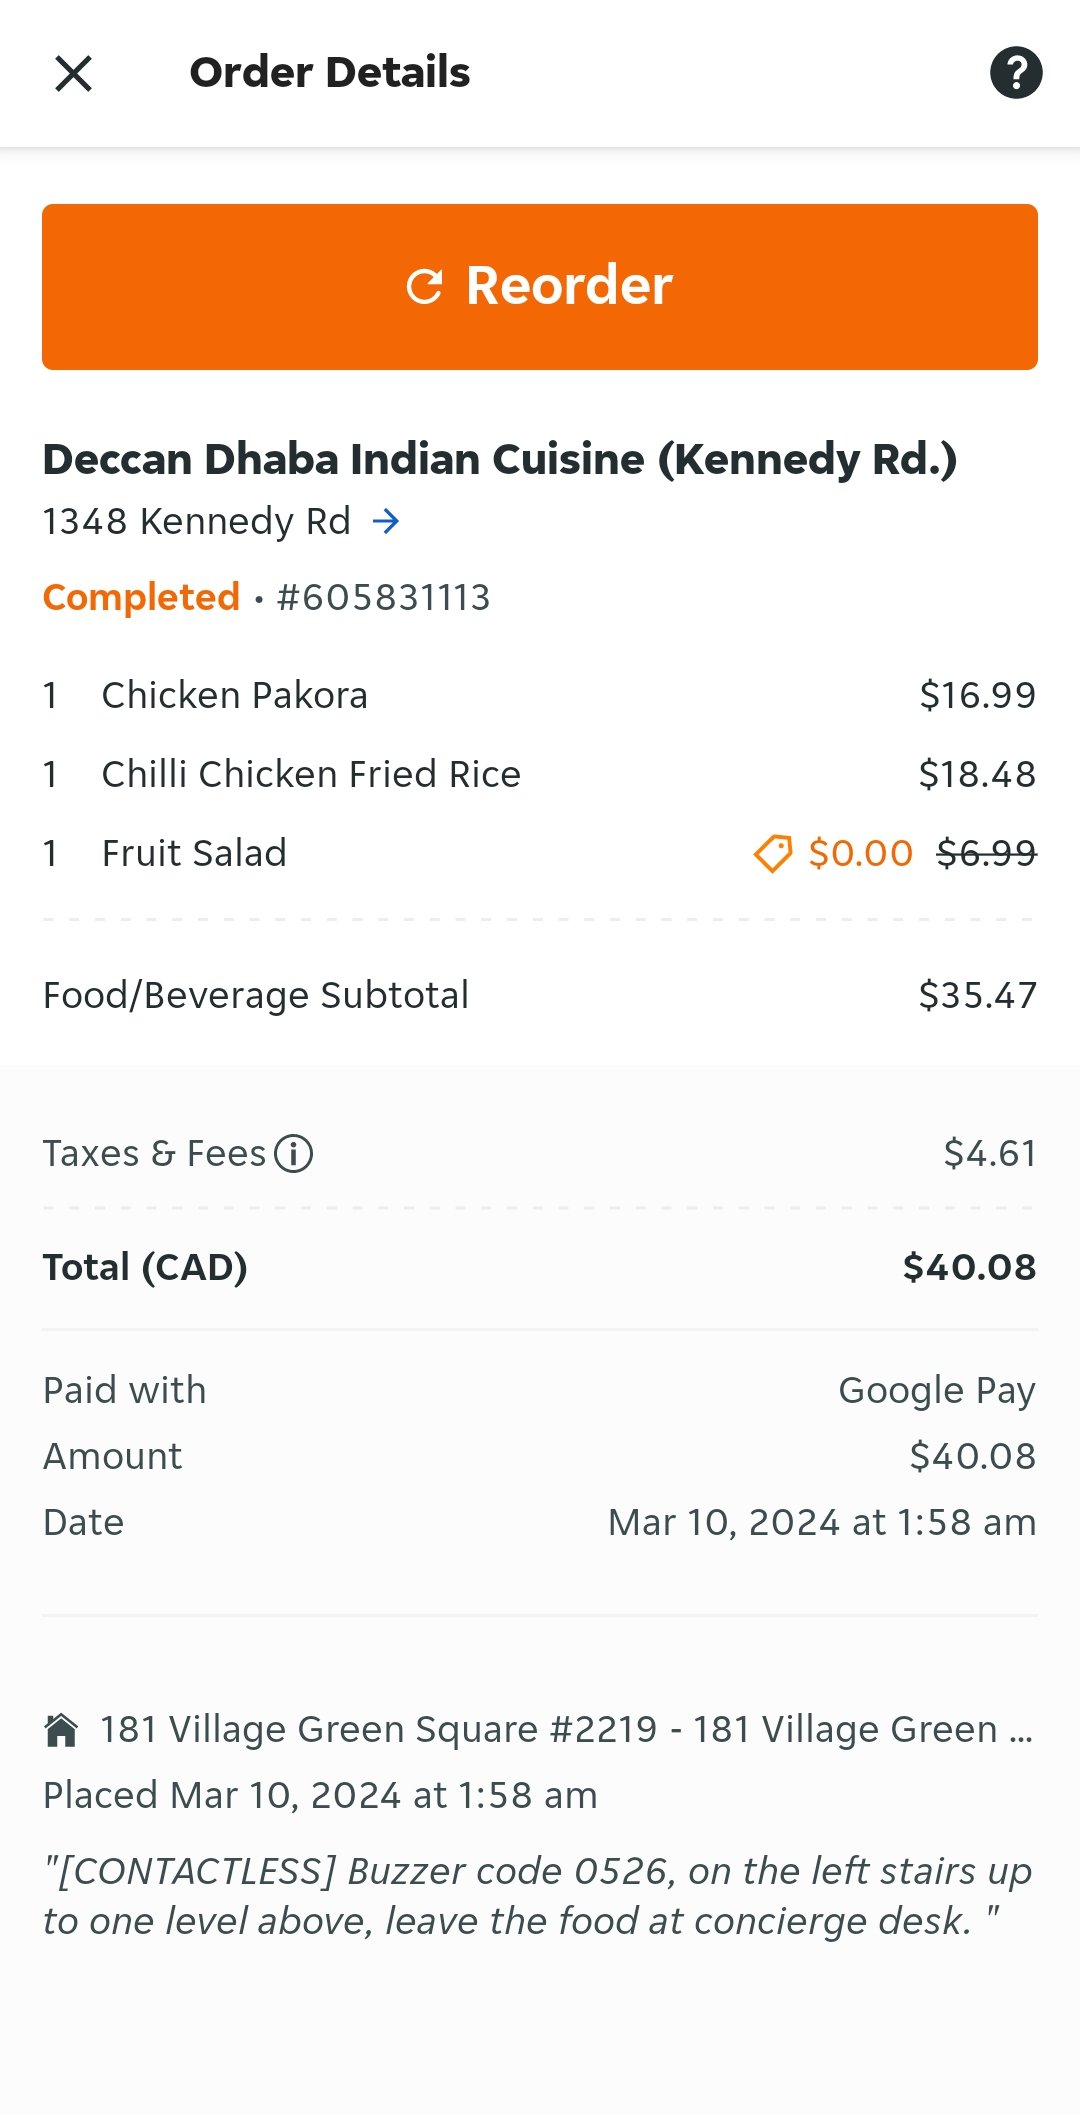 SkipTheDishes complaint Order pickup did not receive